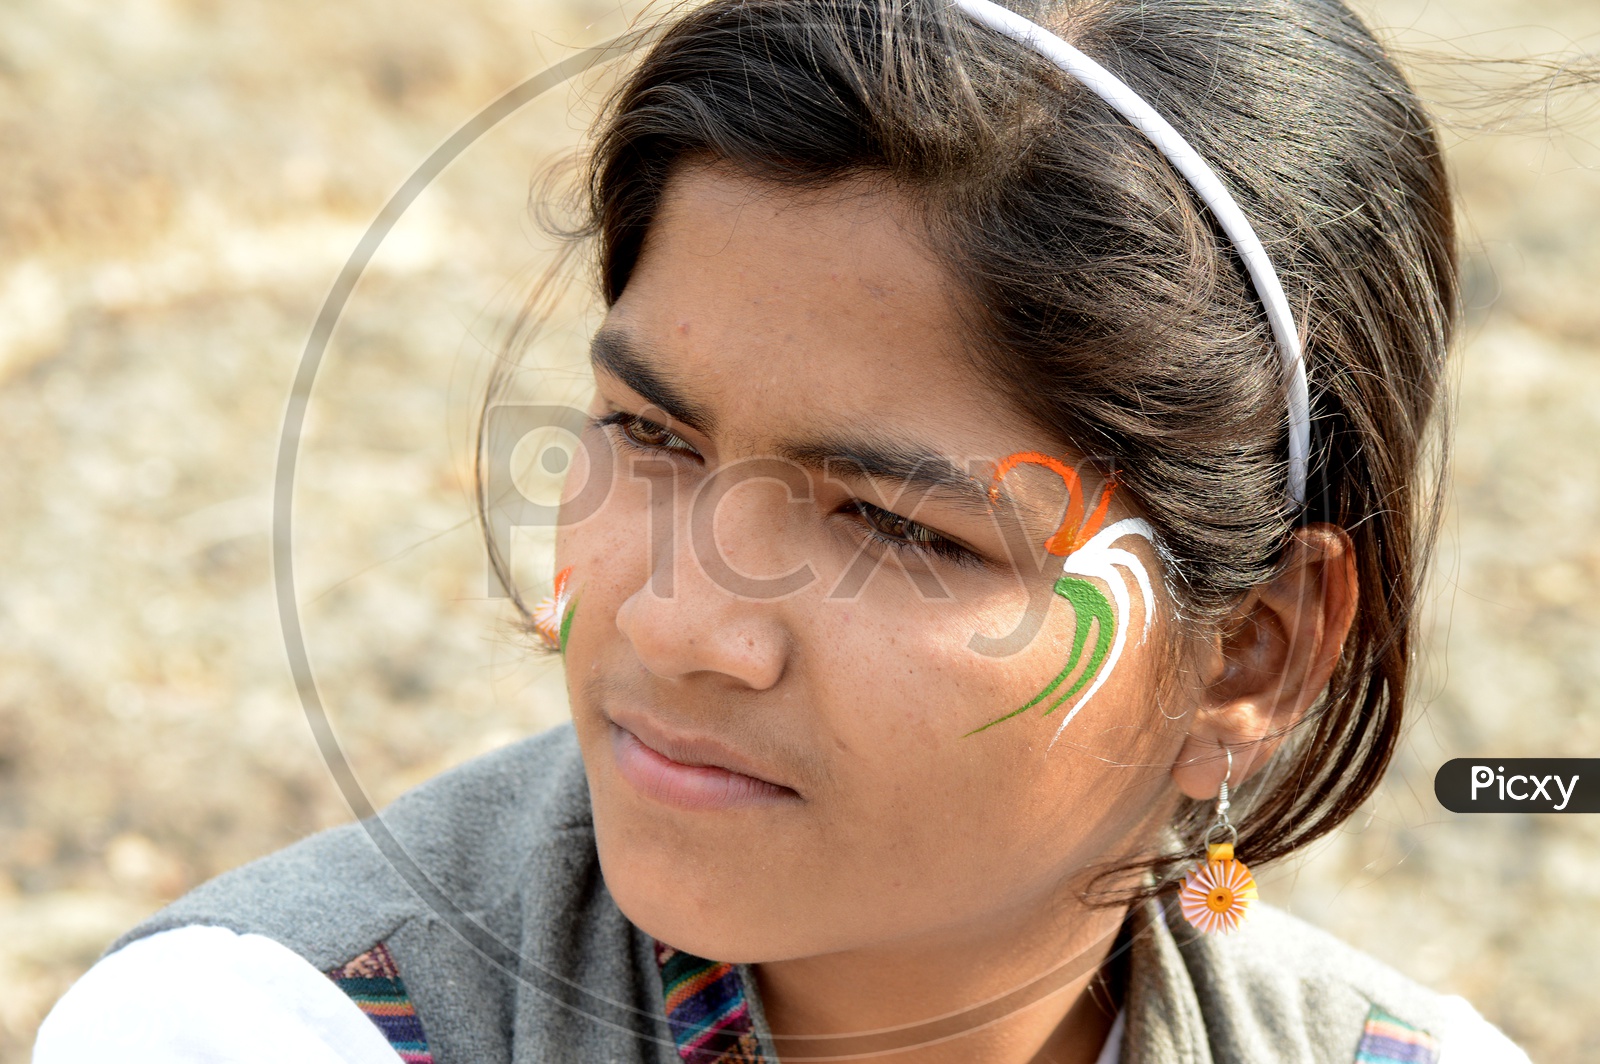 Indian Young People Pasting Indian National Tri-Colors On the Cheek Celebrating Independence Day